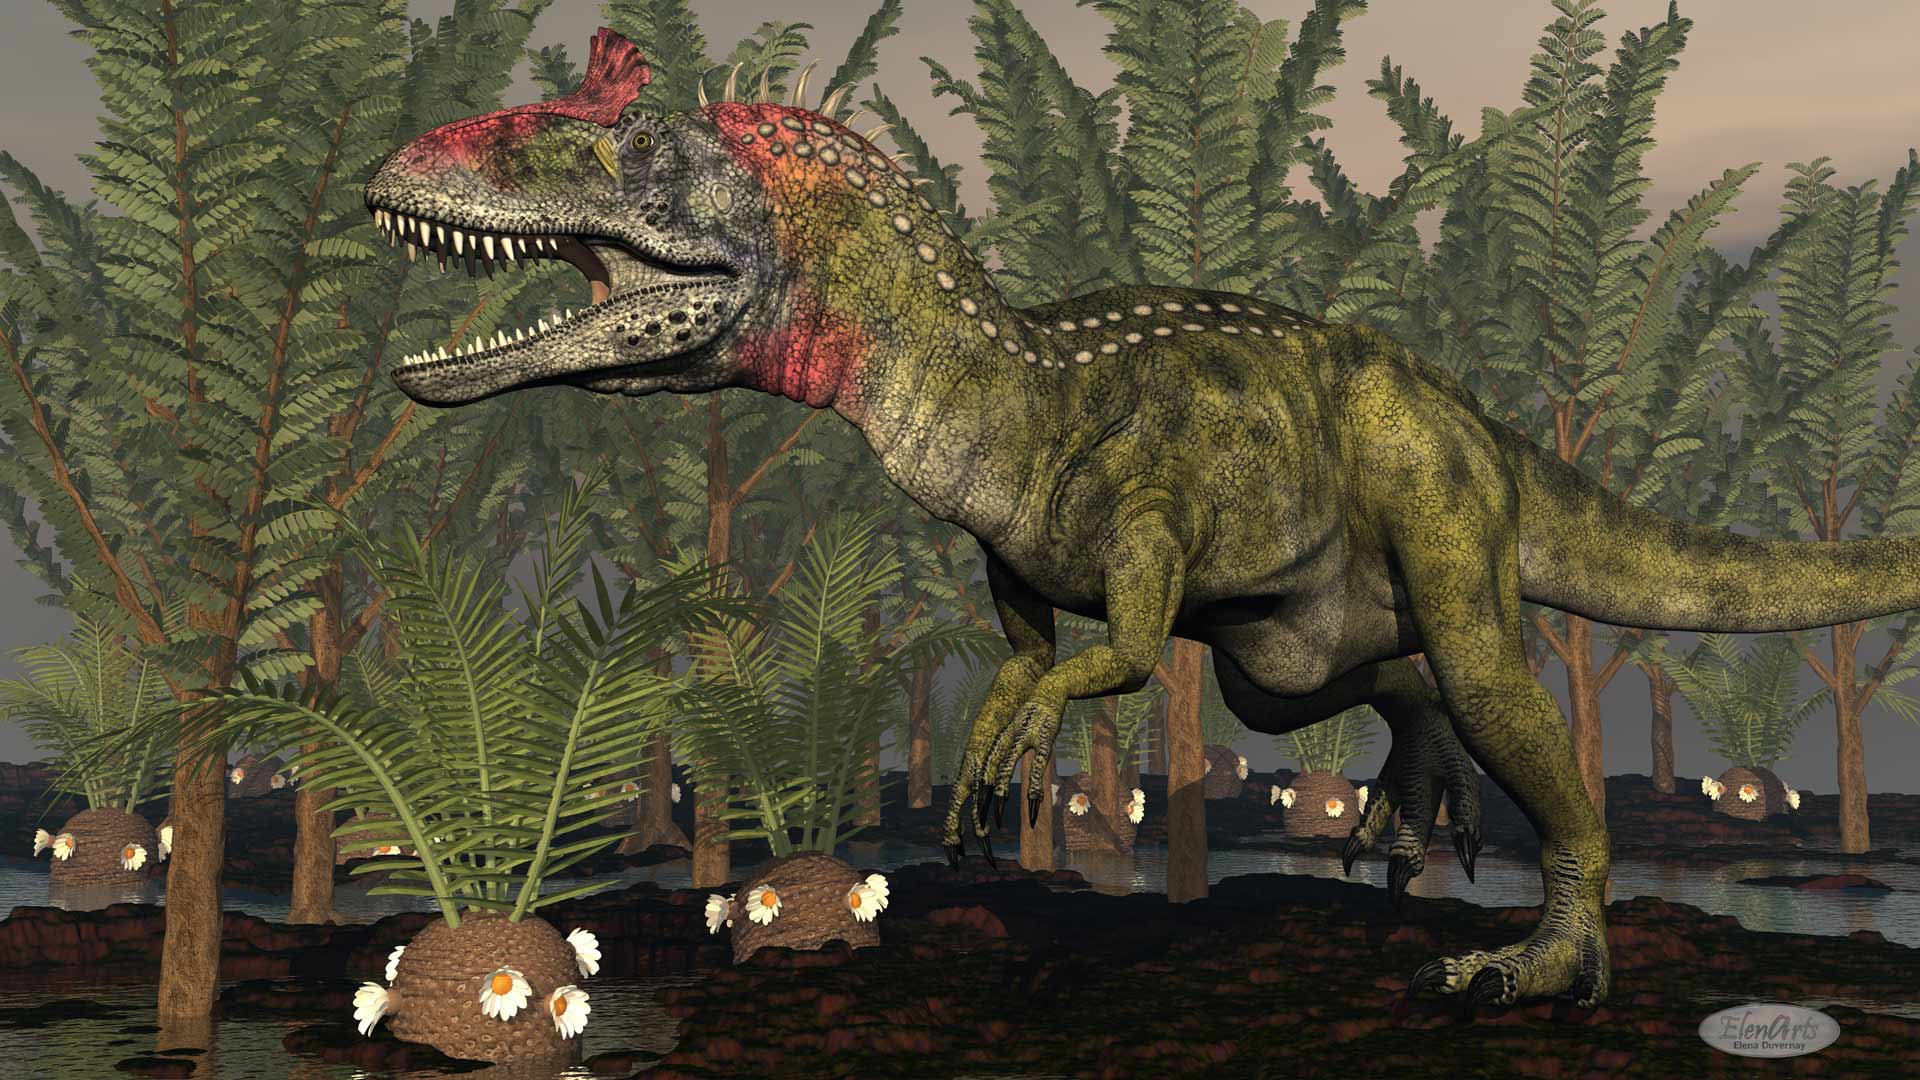 Cryolophosaurus dinosaur walking among pachypteris trees and cycaedeonea plant by cloudy night - 3D render